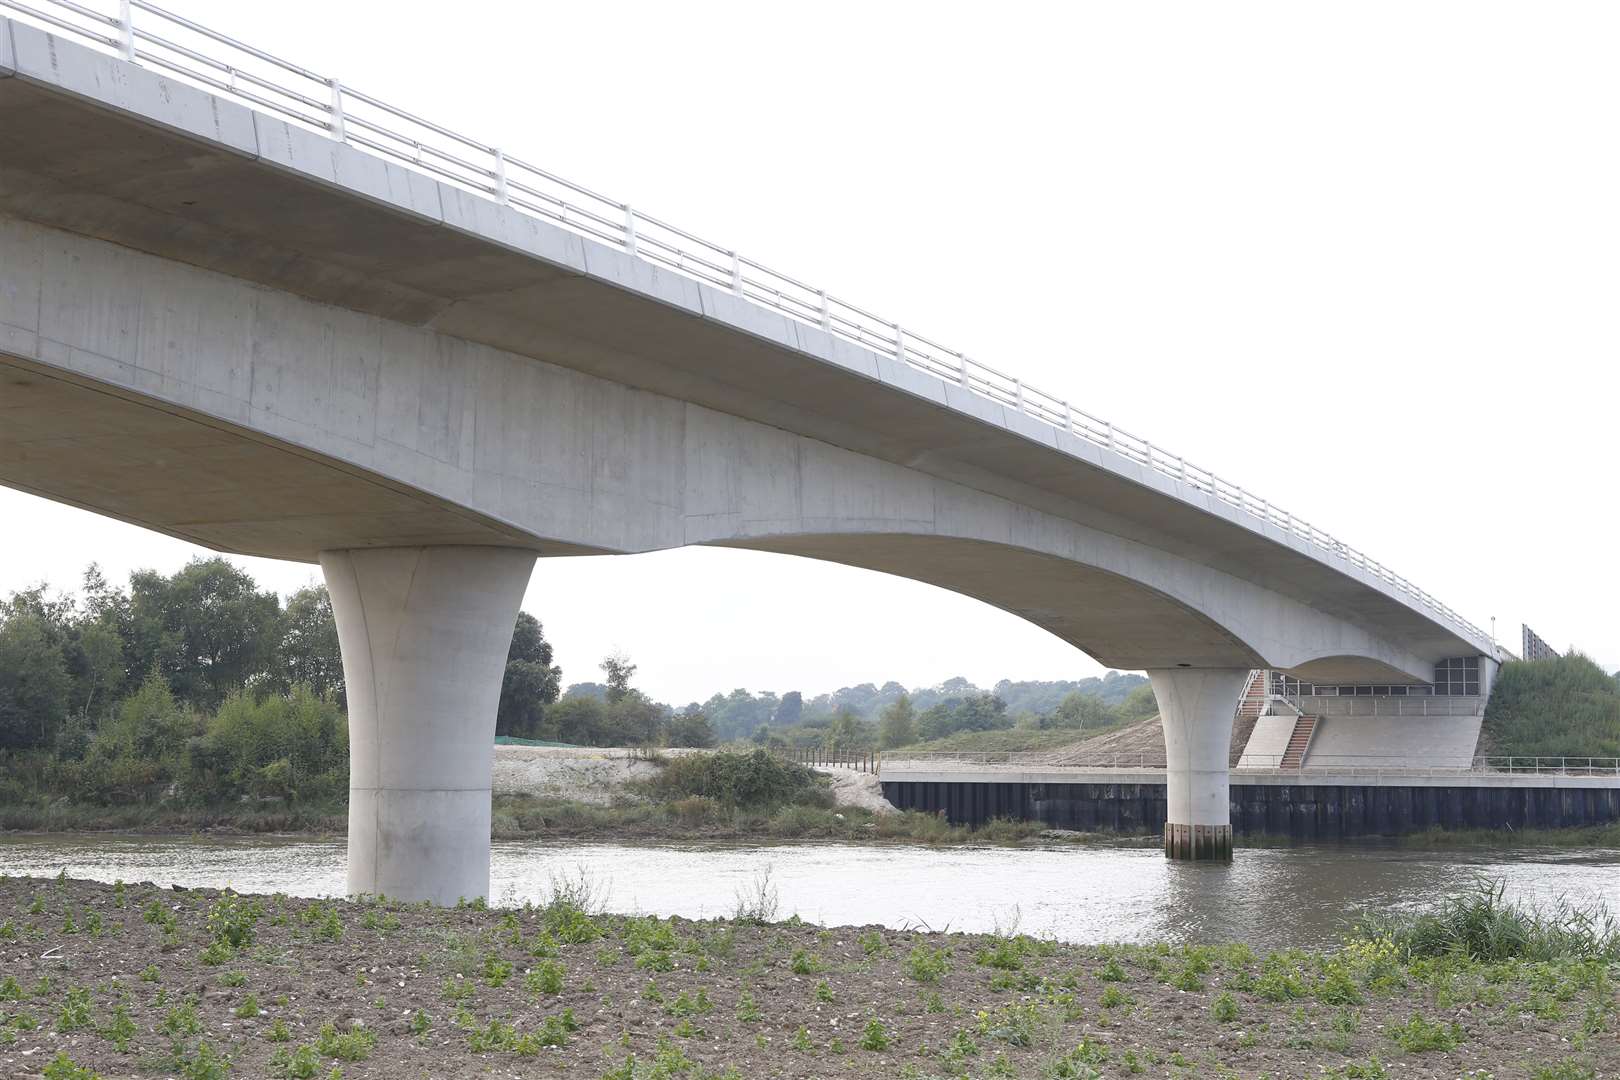 The bridge is to close for repairs after just four months